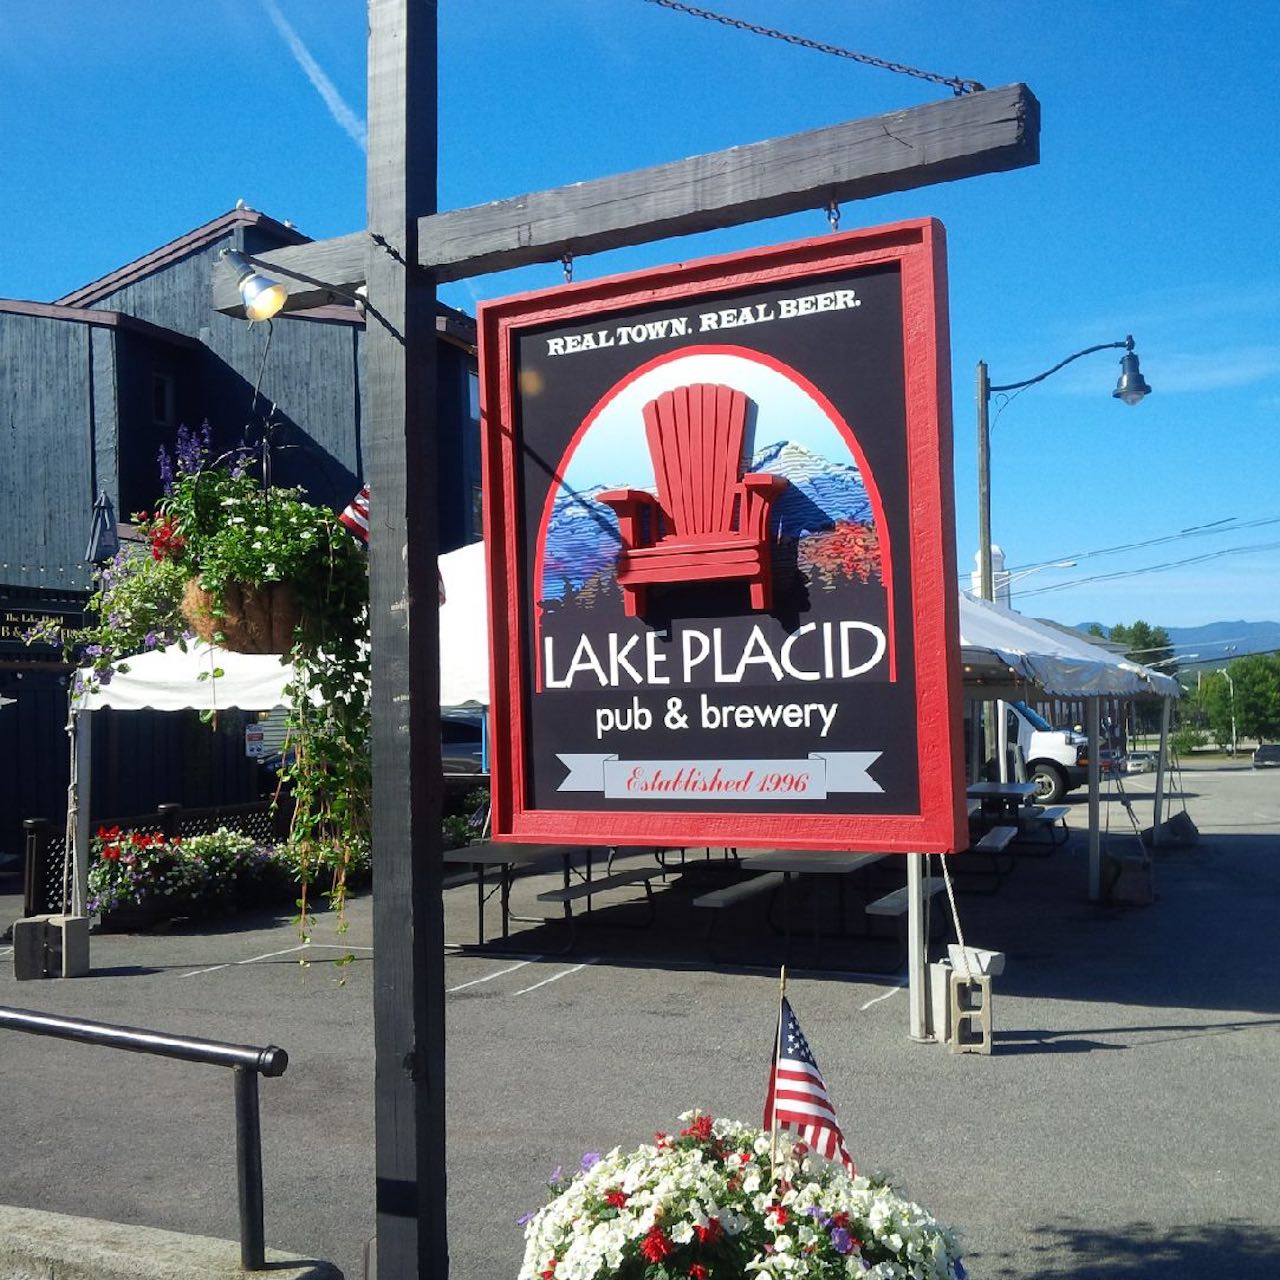 Lake Placid Pub & Brewery don't re use